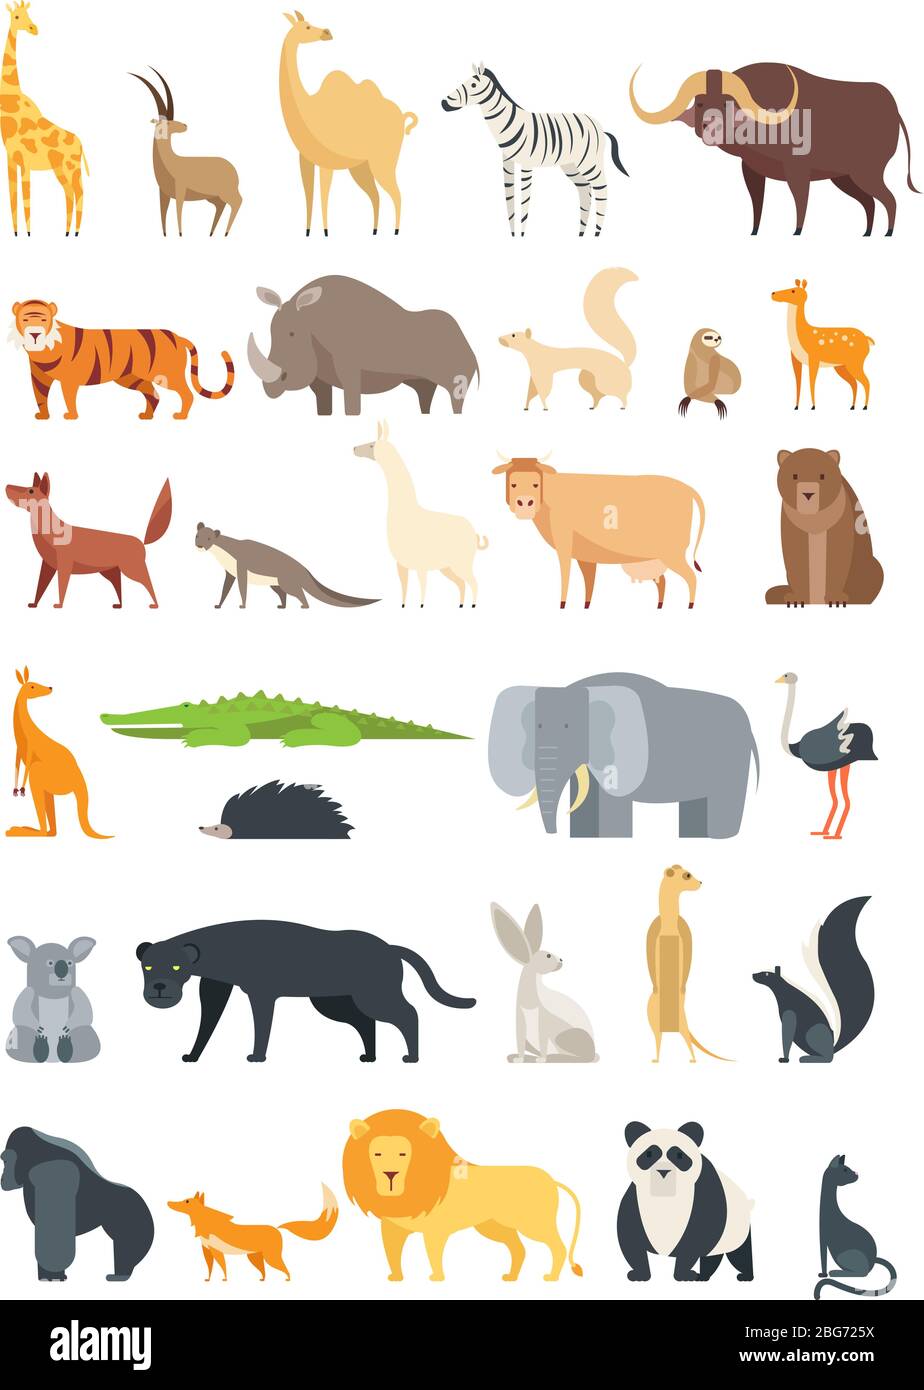 Flat african, jungle and forest animals. Cute mammals and reptiles. Wild fauna vector set isolated. Elephant and lion, giraffe and fox, zebra and bear Stock Vector